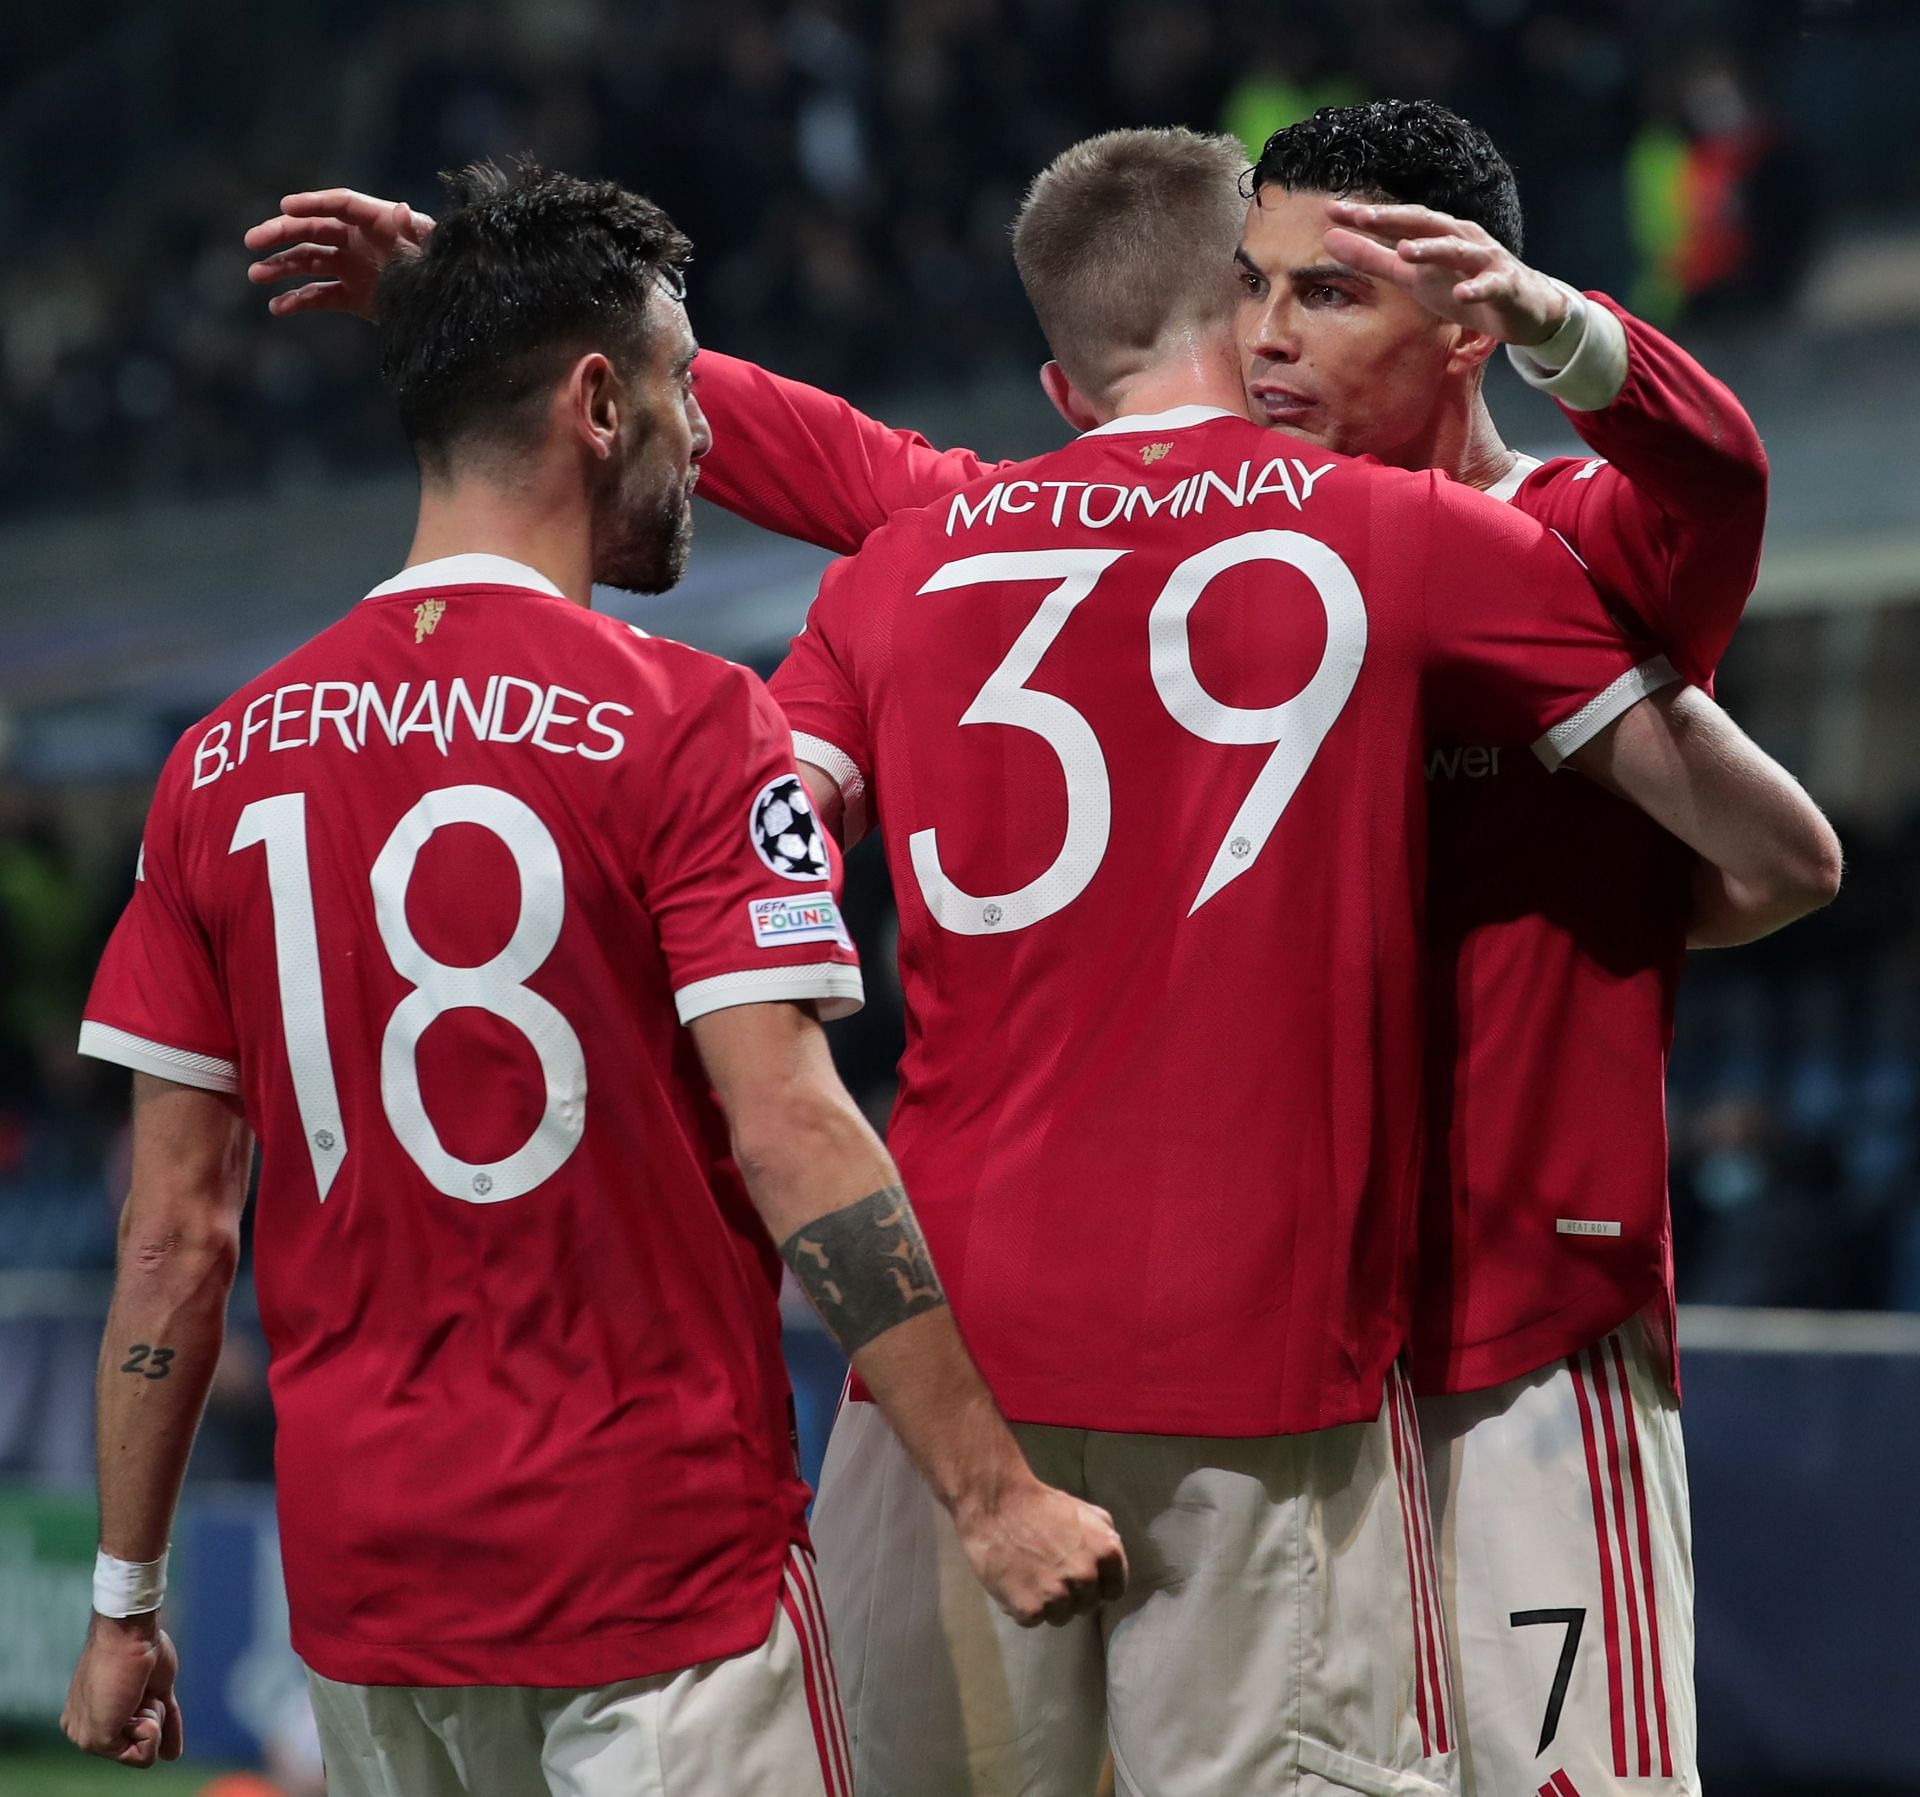 Manchester United played out a 2-2 draw with Atalanta in the Champions League on Tuesday